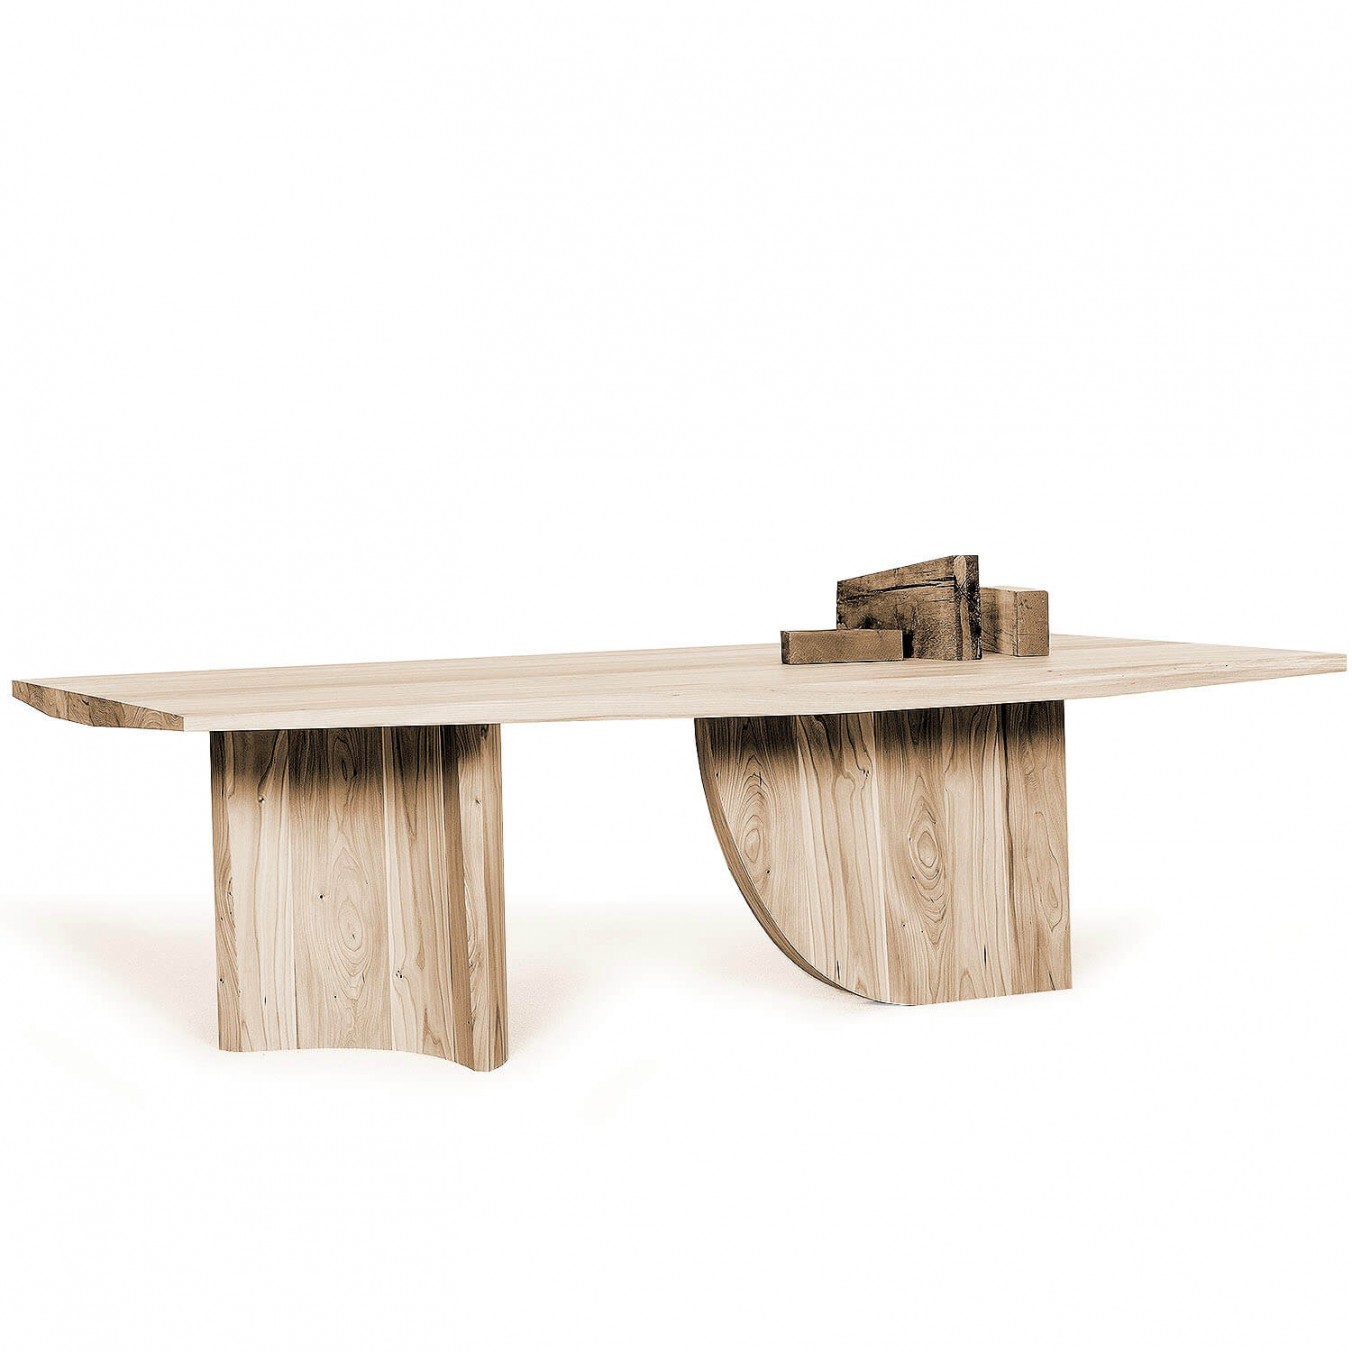 TEO table